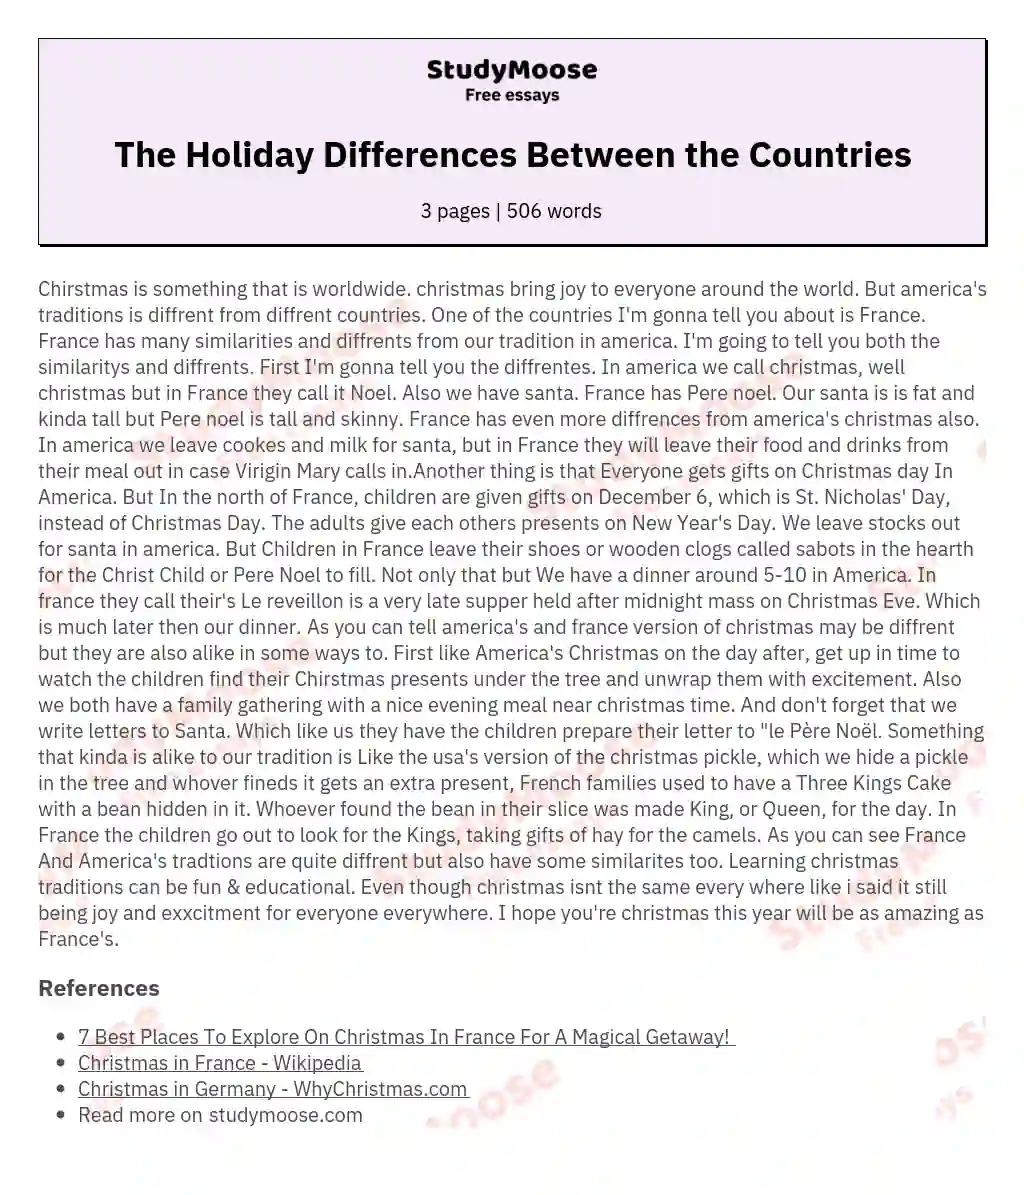 The Holiday Differences Between the Countries essay